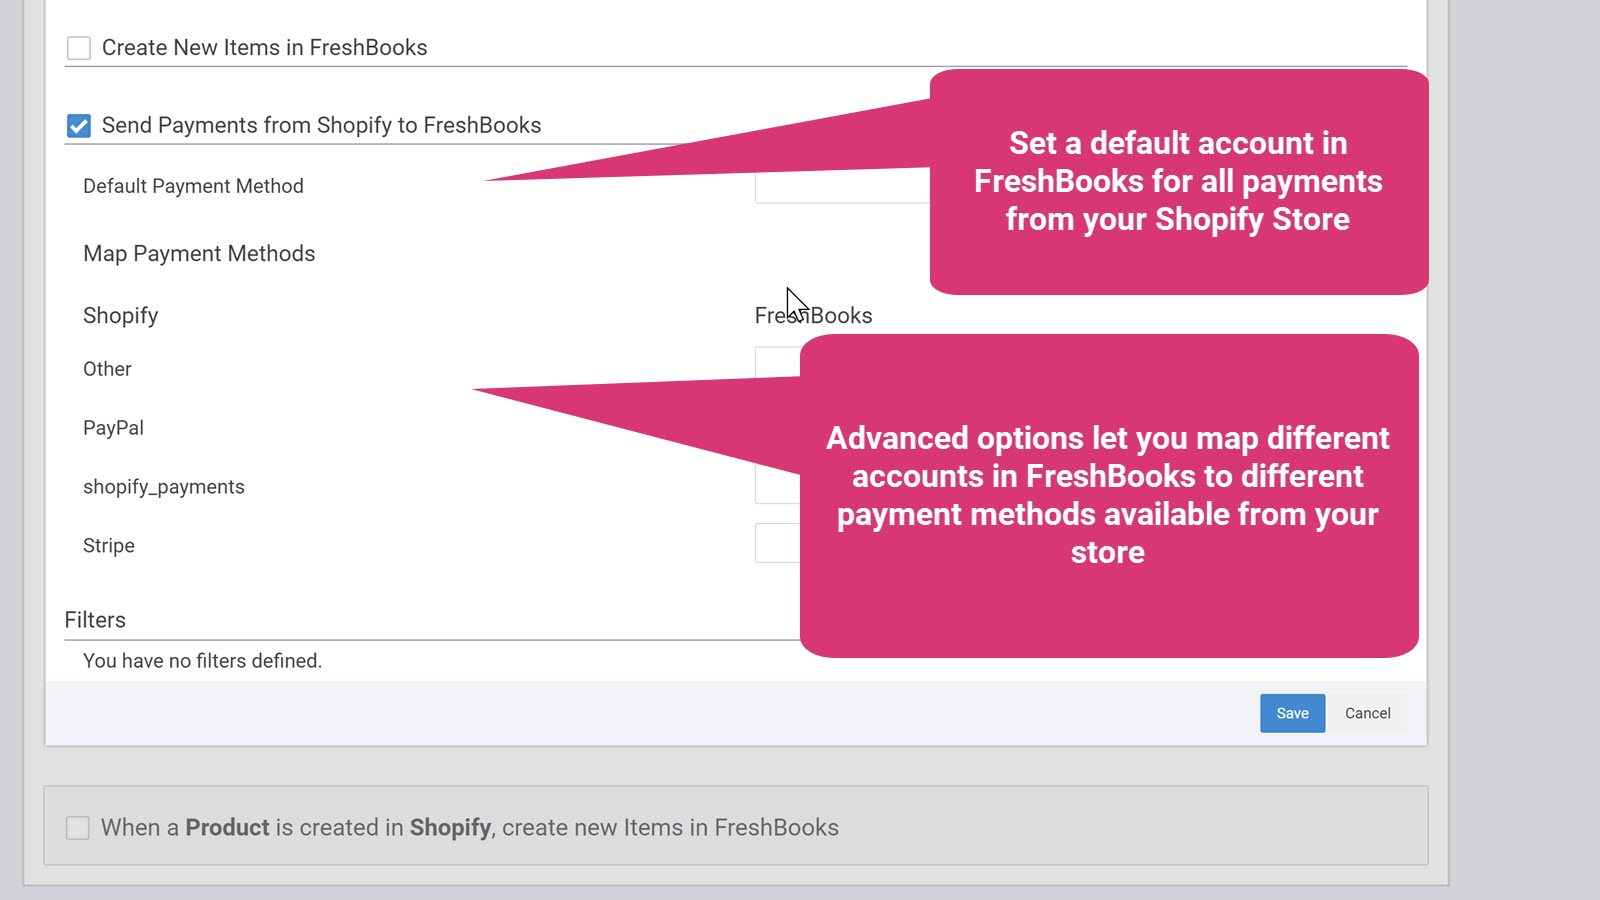 Map payment options to accounts in FreshBooks